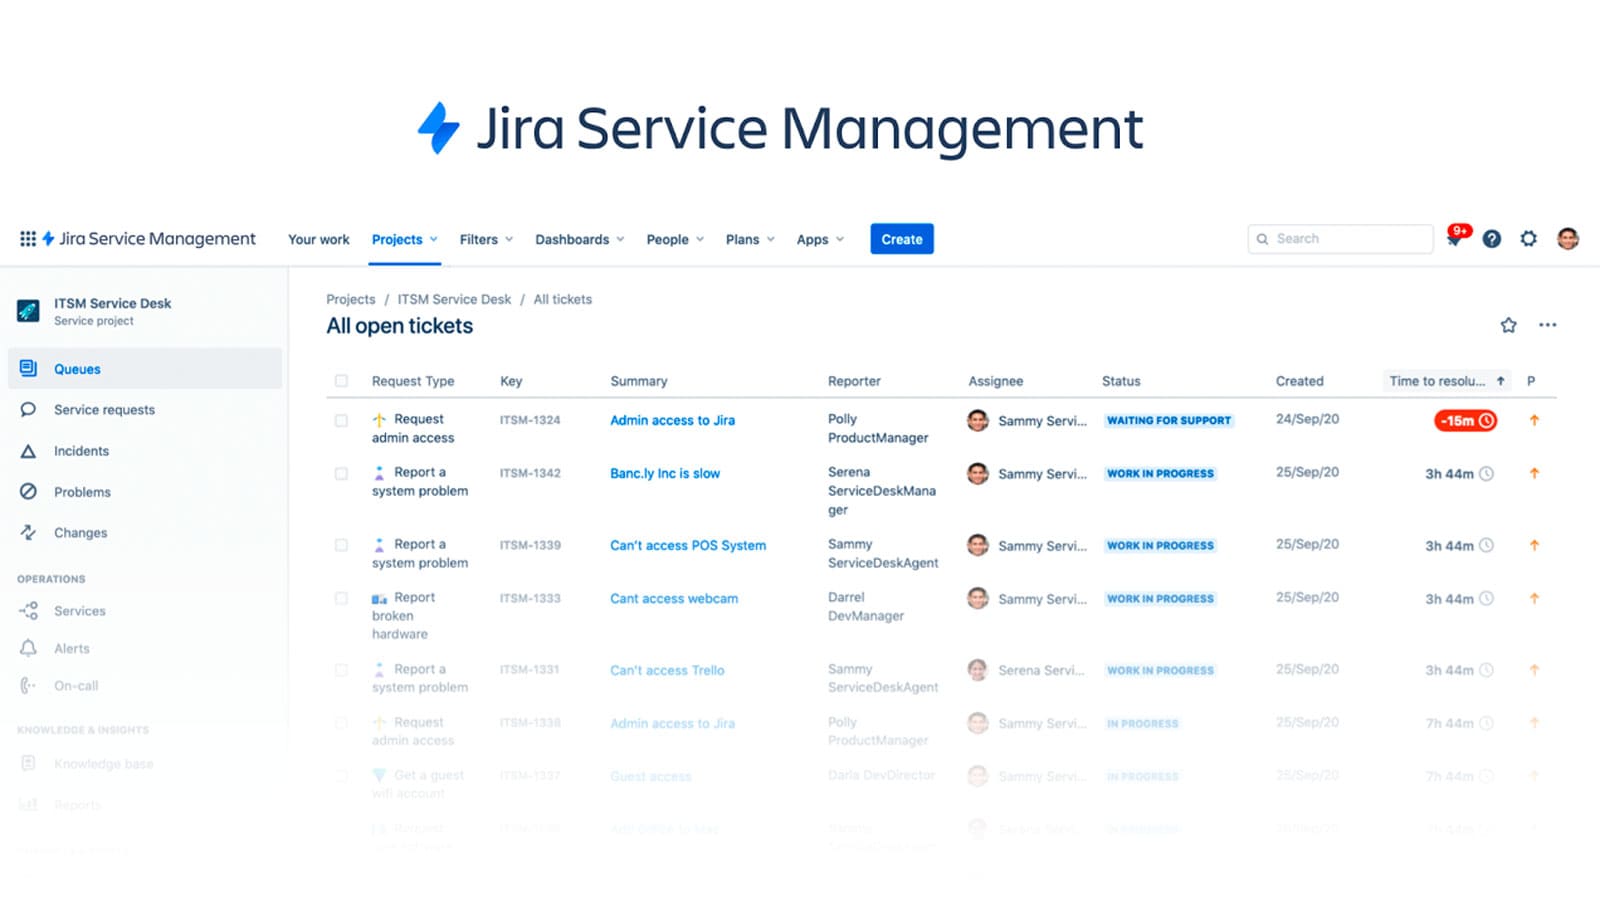 Example of Jira Service Management's interface.